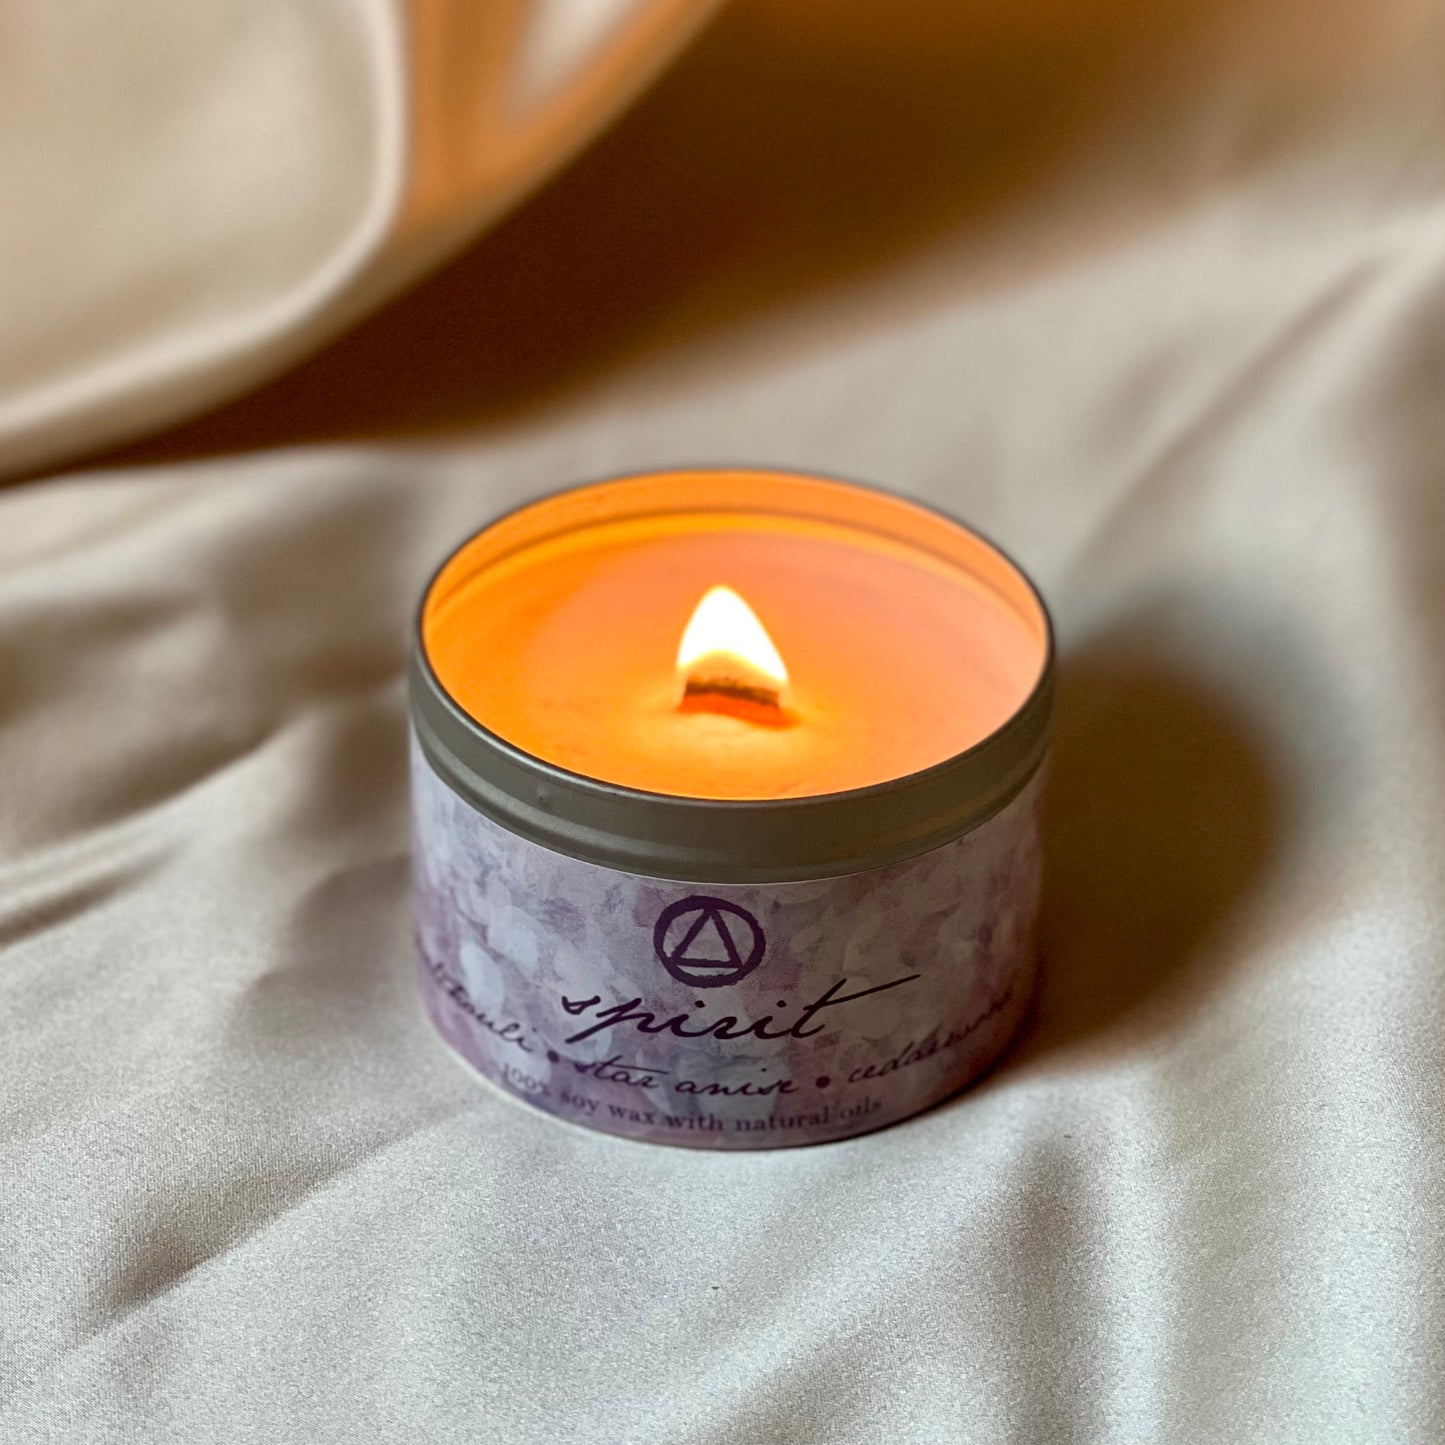 Spirit | 5 Elements Soy Wax Candle